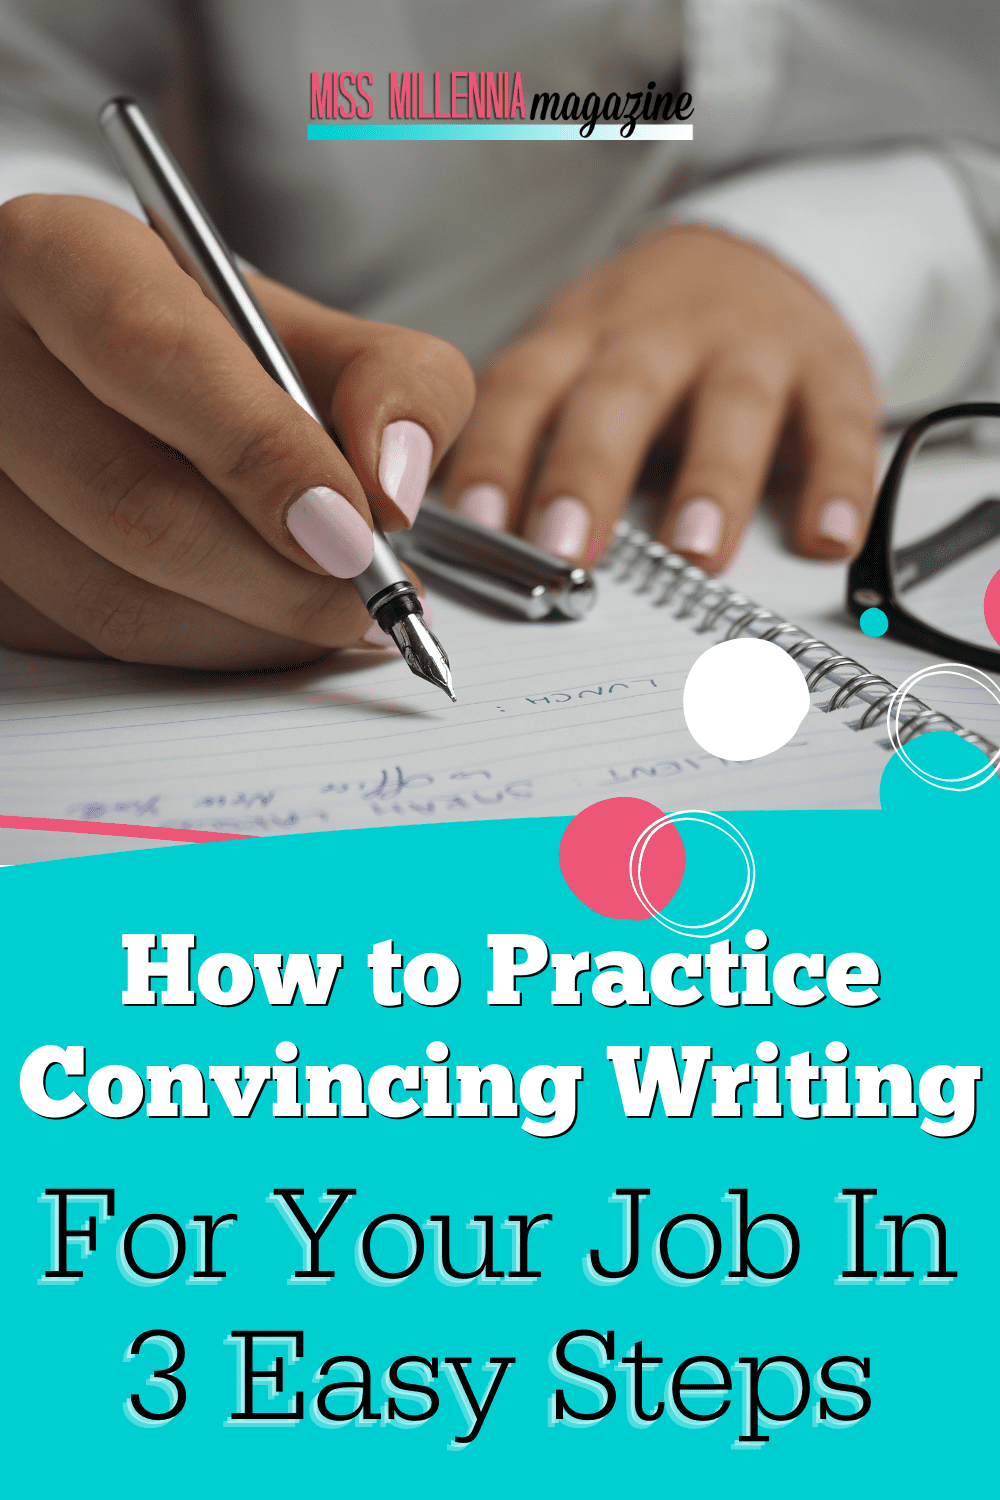 How to Practice Convincing Writing For Your Job In 3 Easy Steps